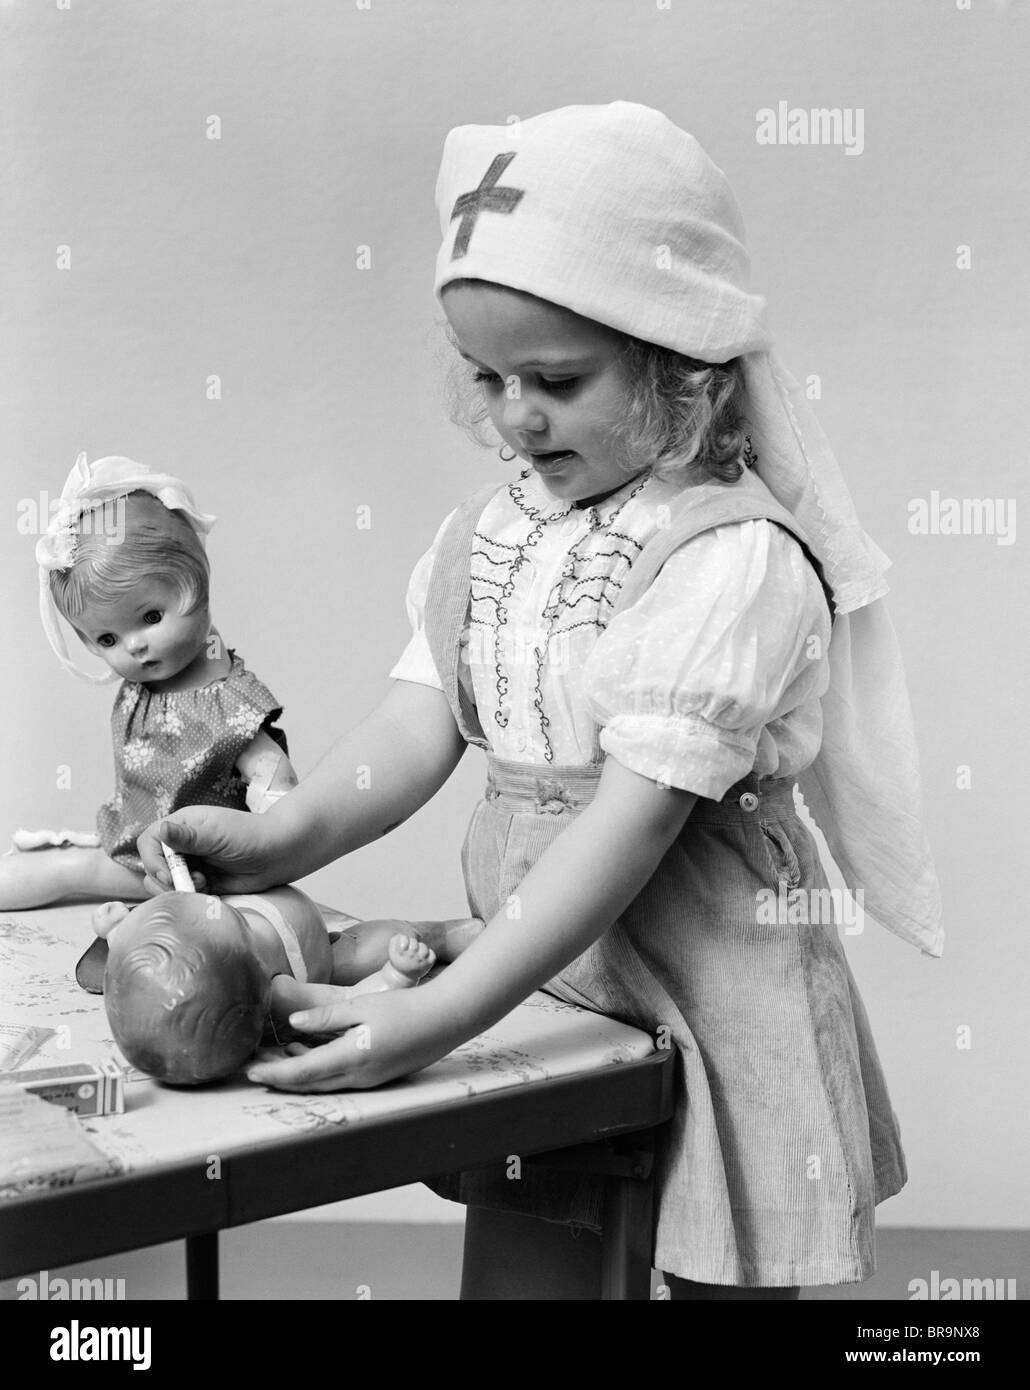 1940s CHILD PLAYING NURSE WITH DOLLS Stock Photo